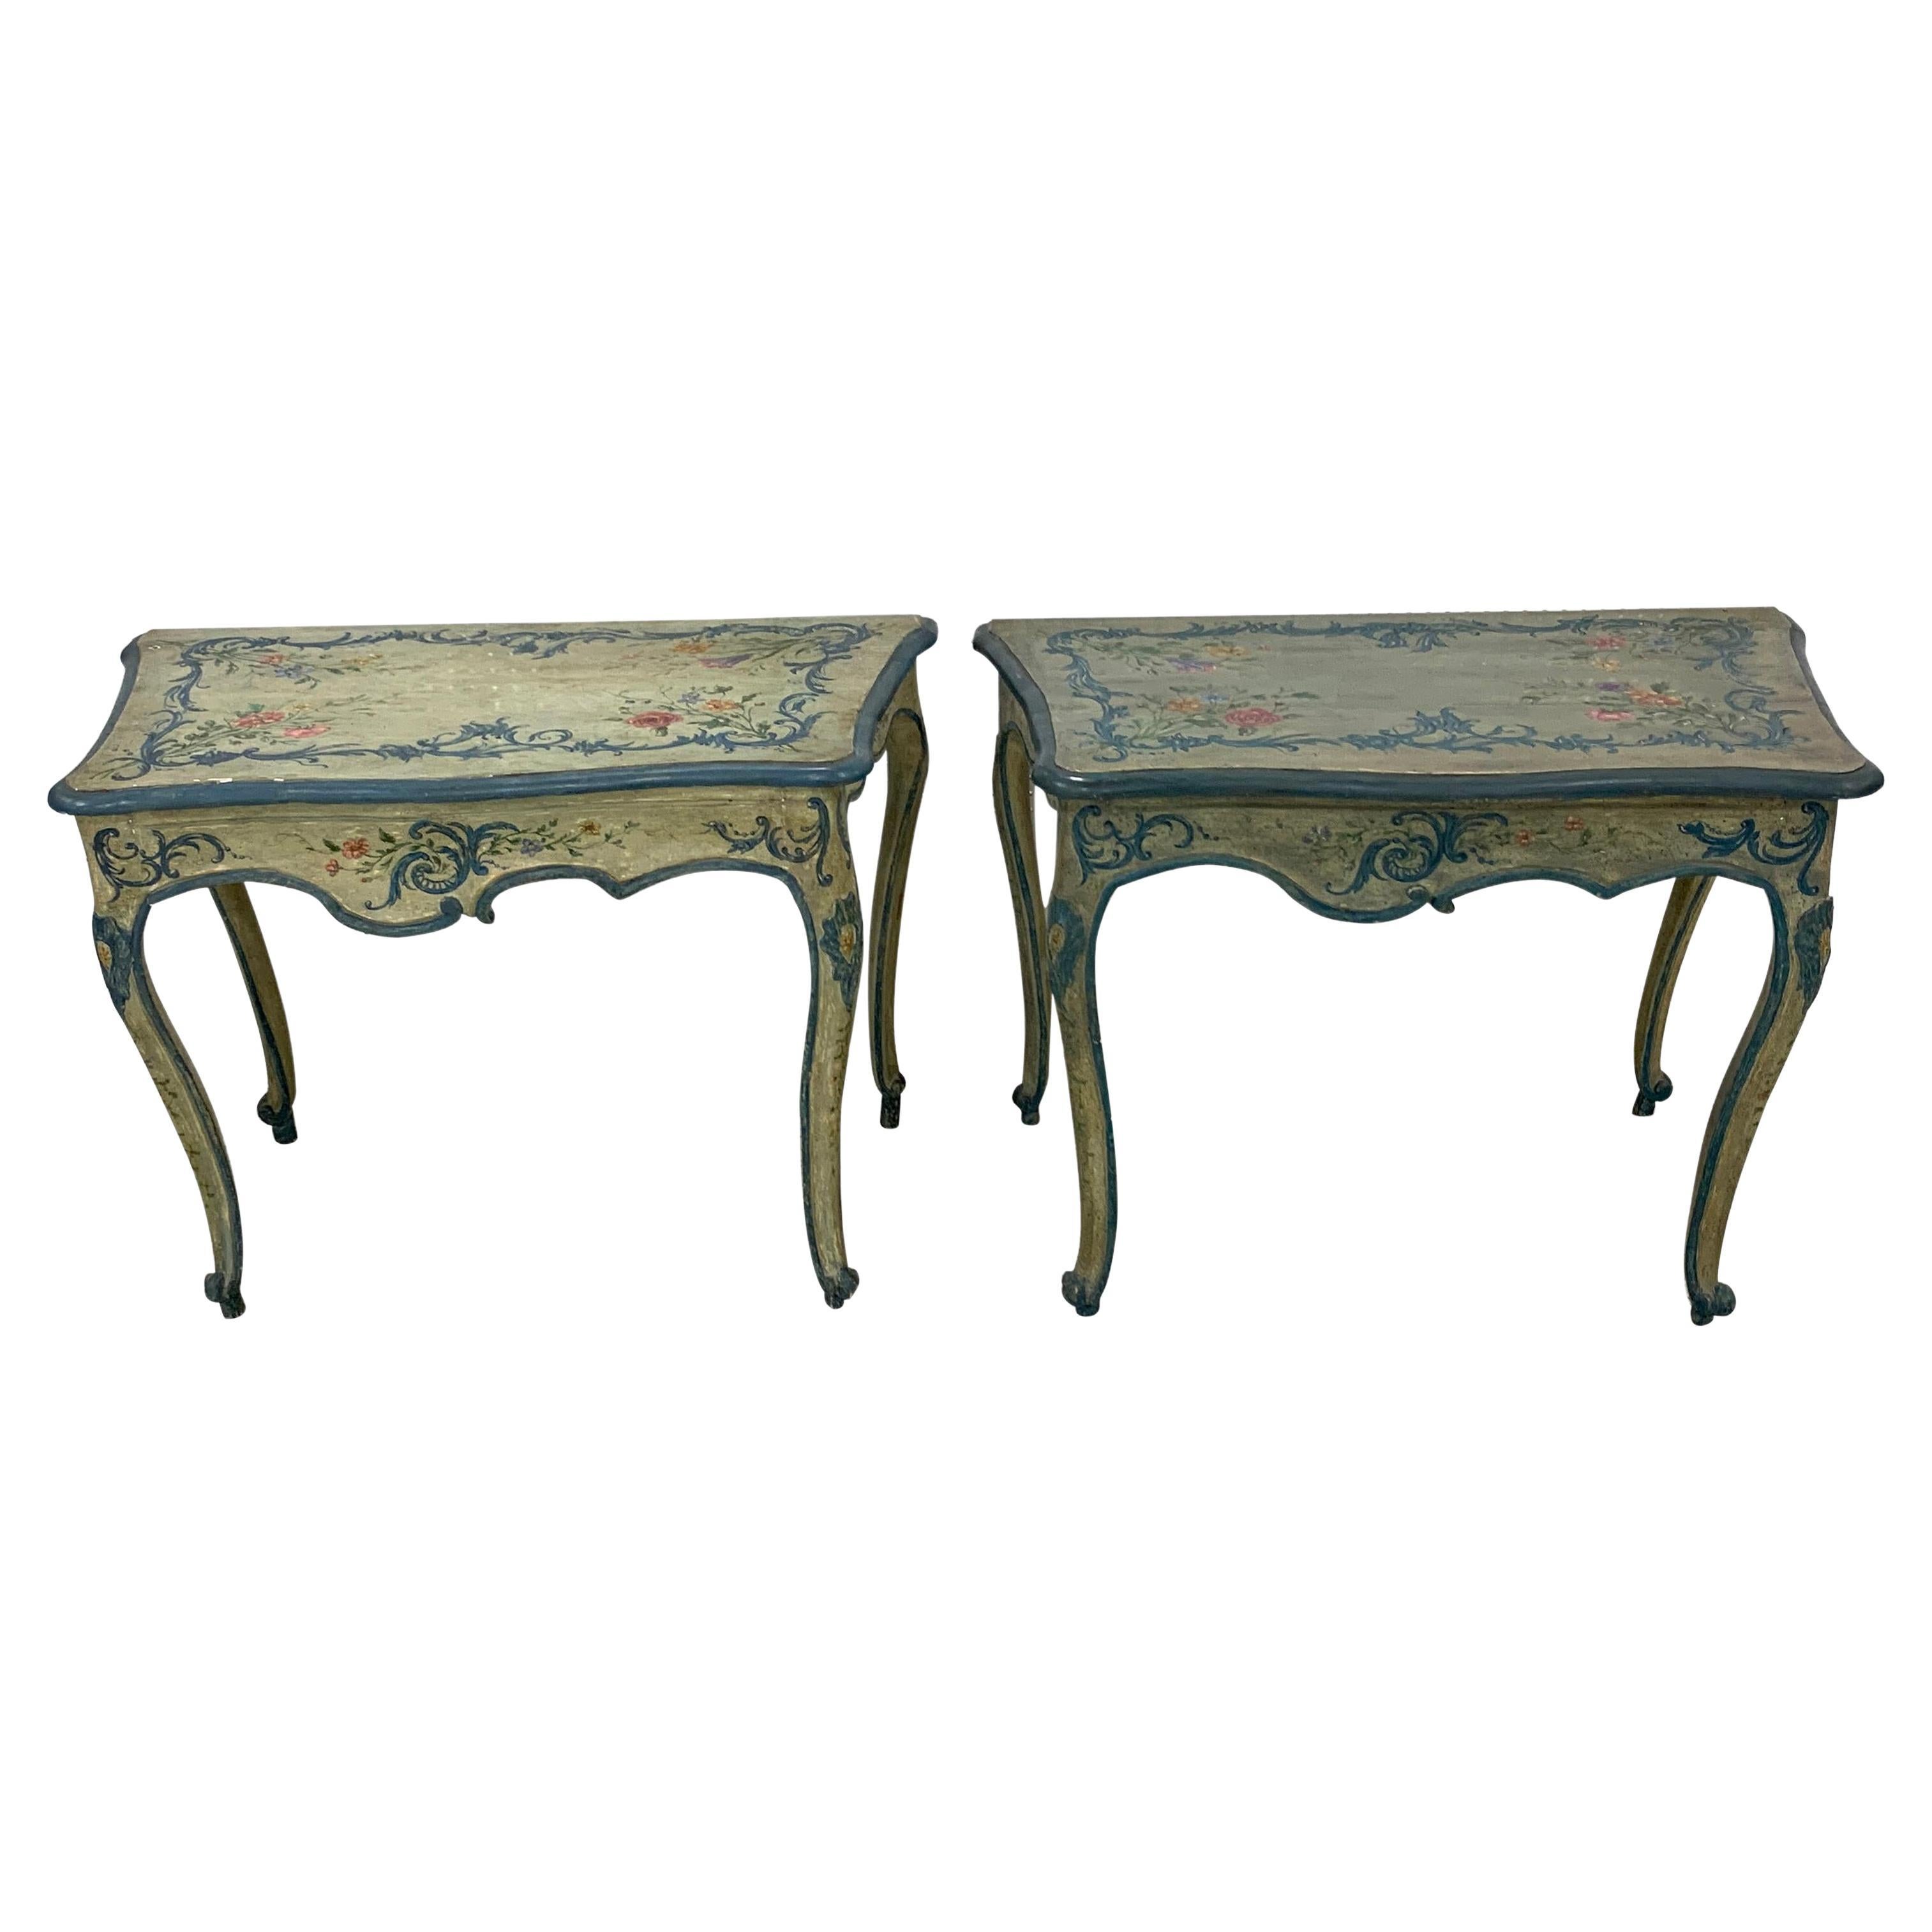 Near Pair of 18th-19th Century Painted Italian Console Tables, François Coty